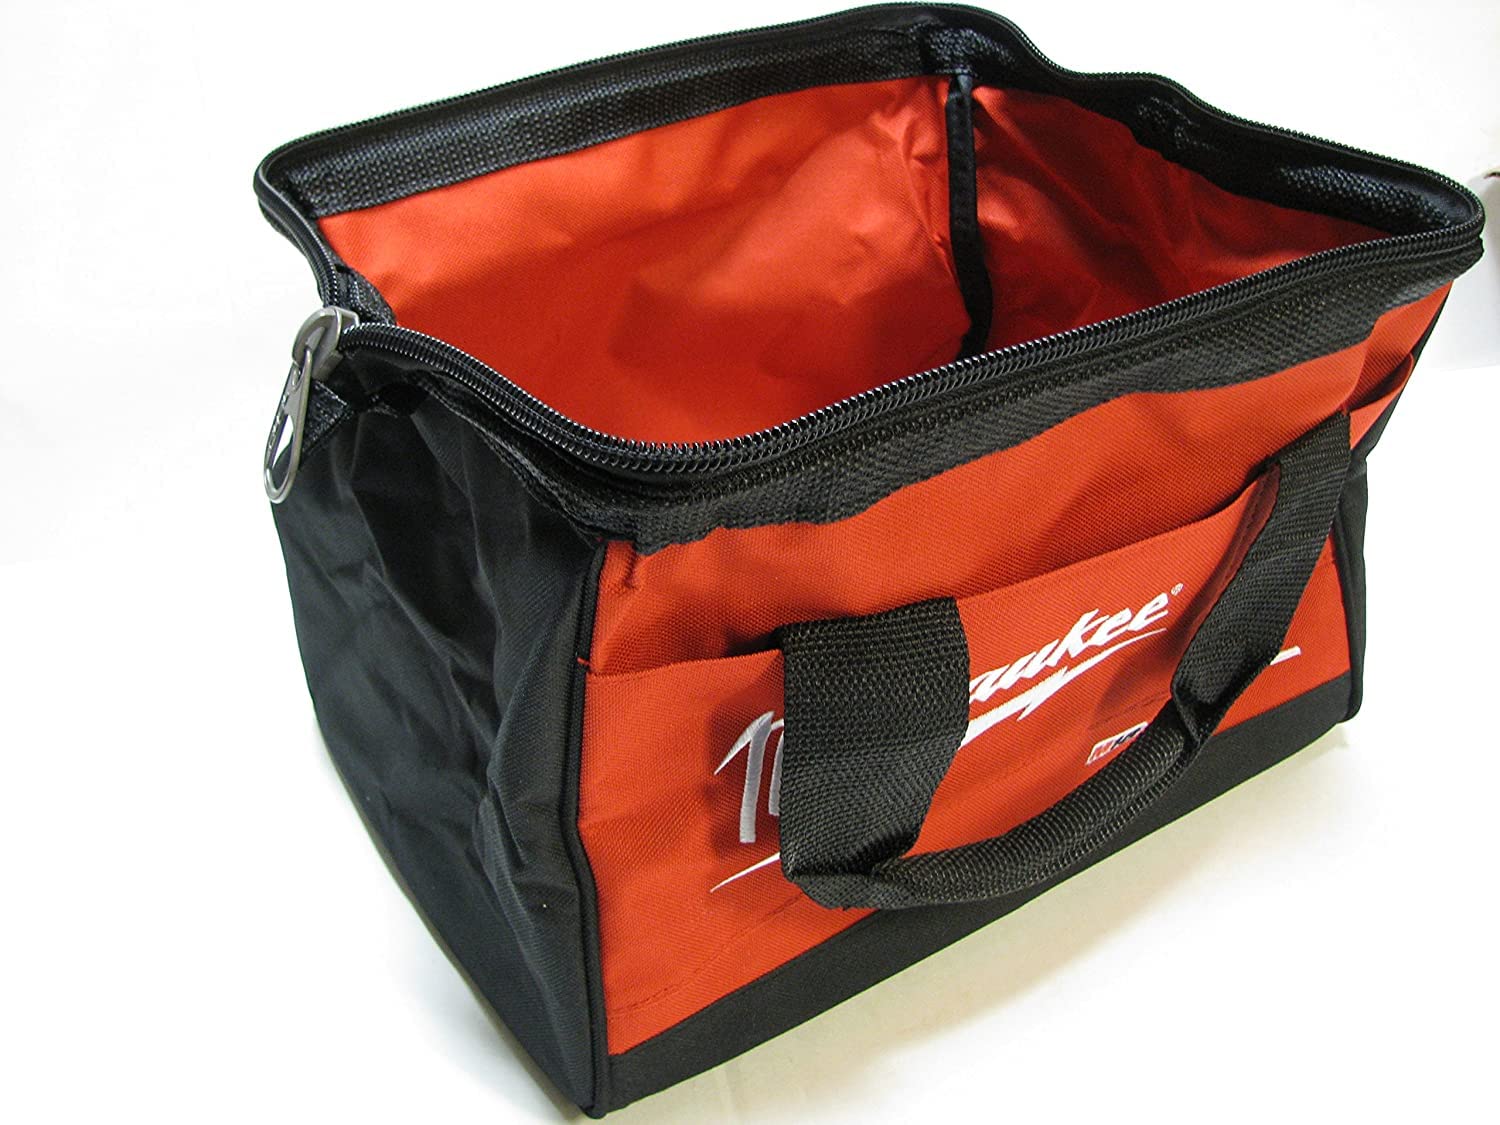 Milwaukee Heavy Duty (FUEL Tool Bag). Fits (1-2 Tool Kit) 2760-20, 2866-22, 2866-20, Fuel Screwgun and other Cordless Tools alike